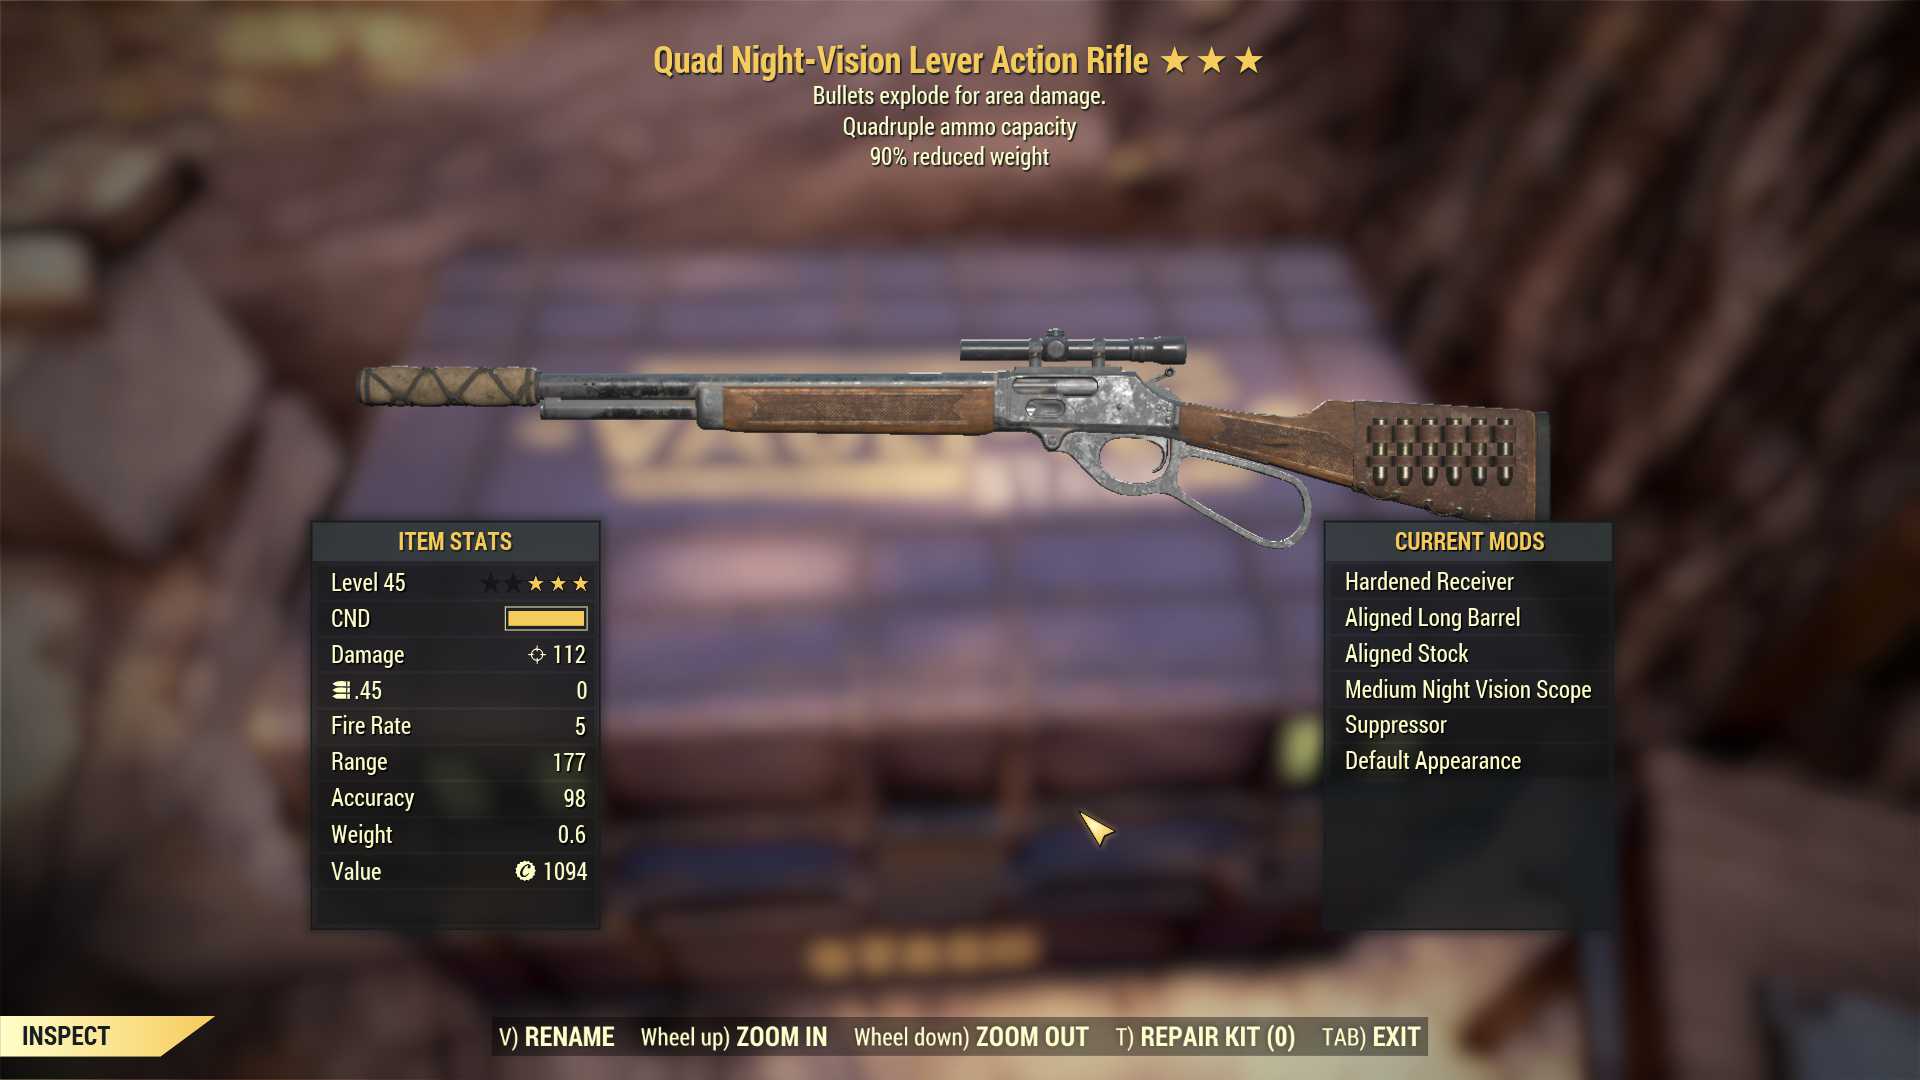 Quad Explosive Lever Action Rifle (90% reduced weight)